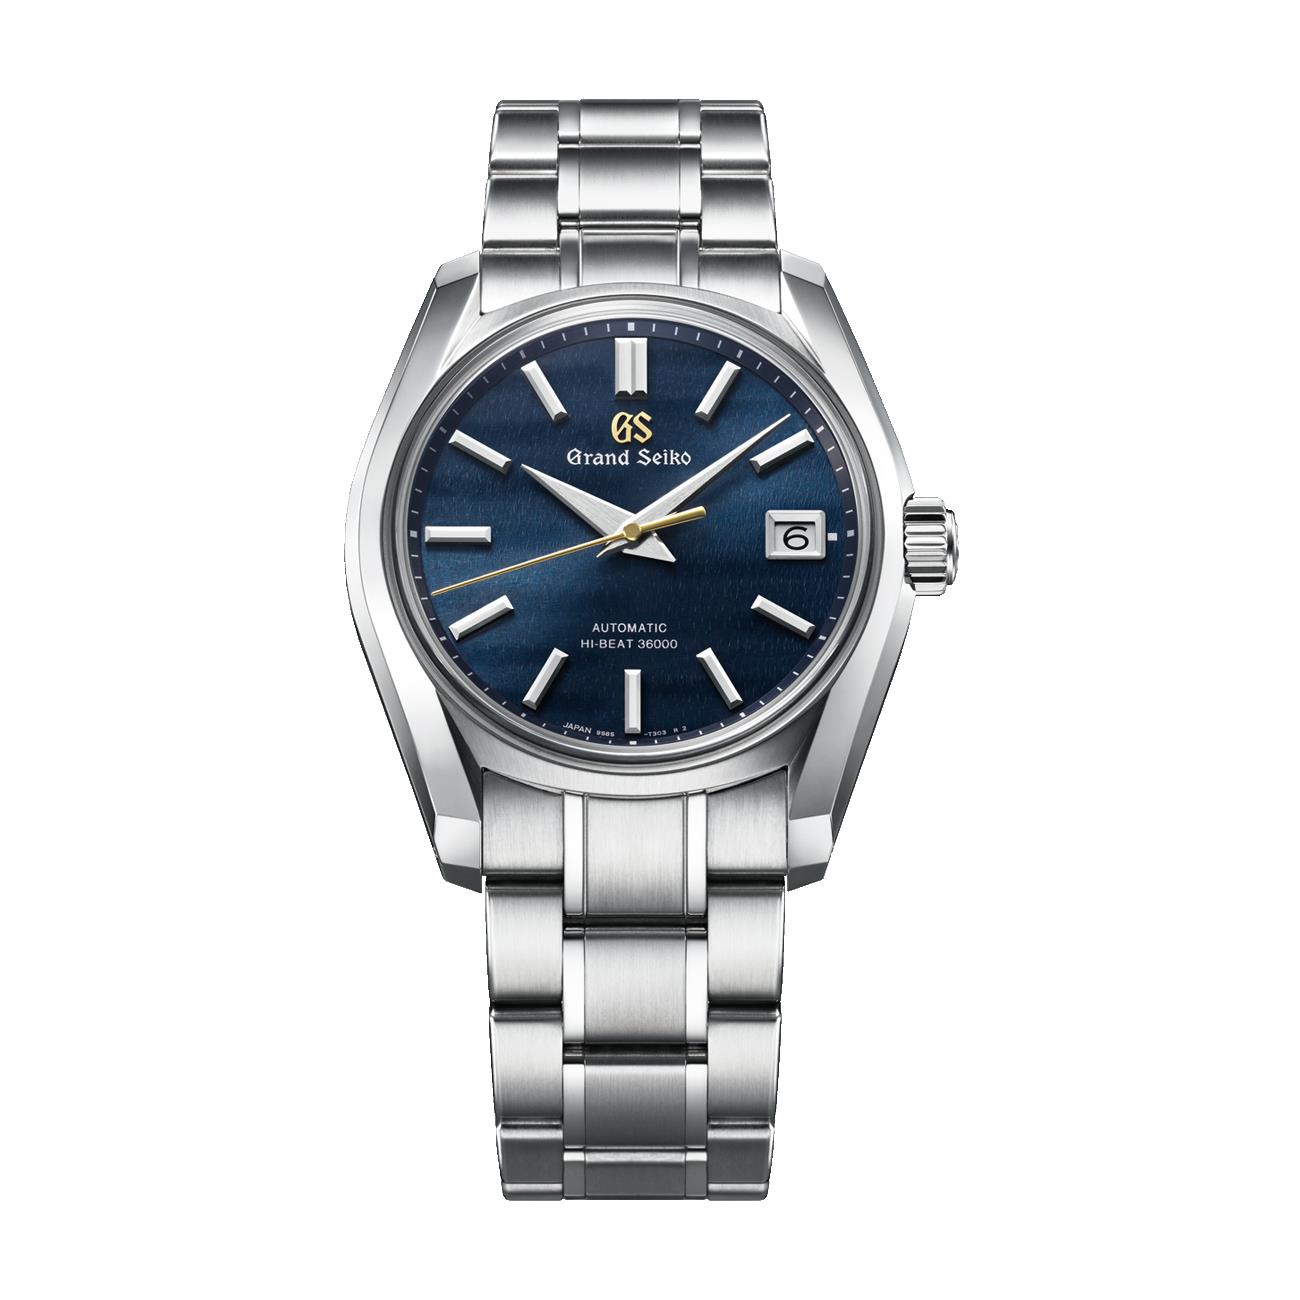 Grand Seiko Heritage Collection Mechanical Hi-Beat Fall Stainless Steel 40mm